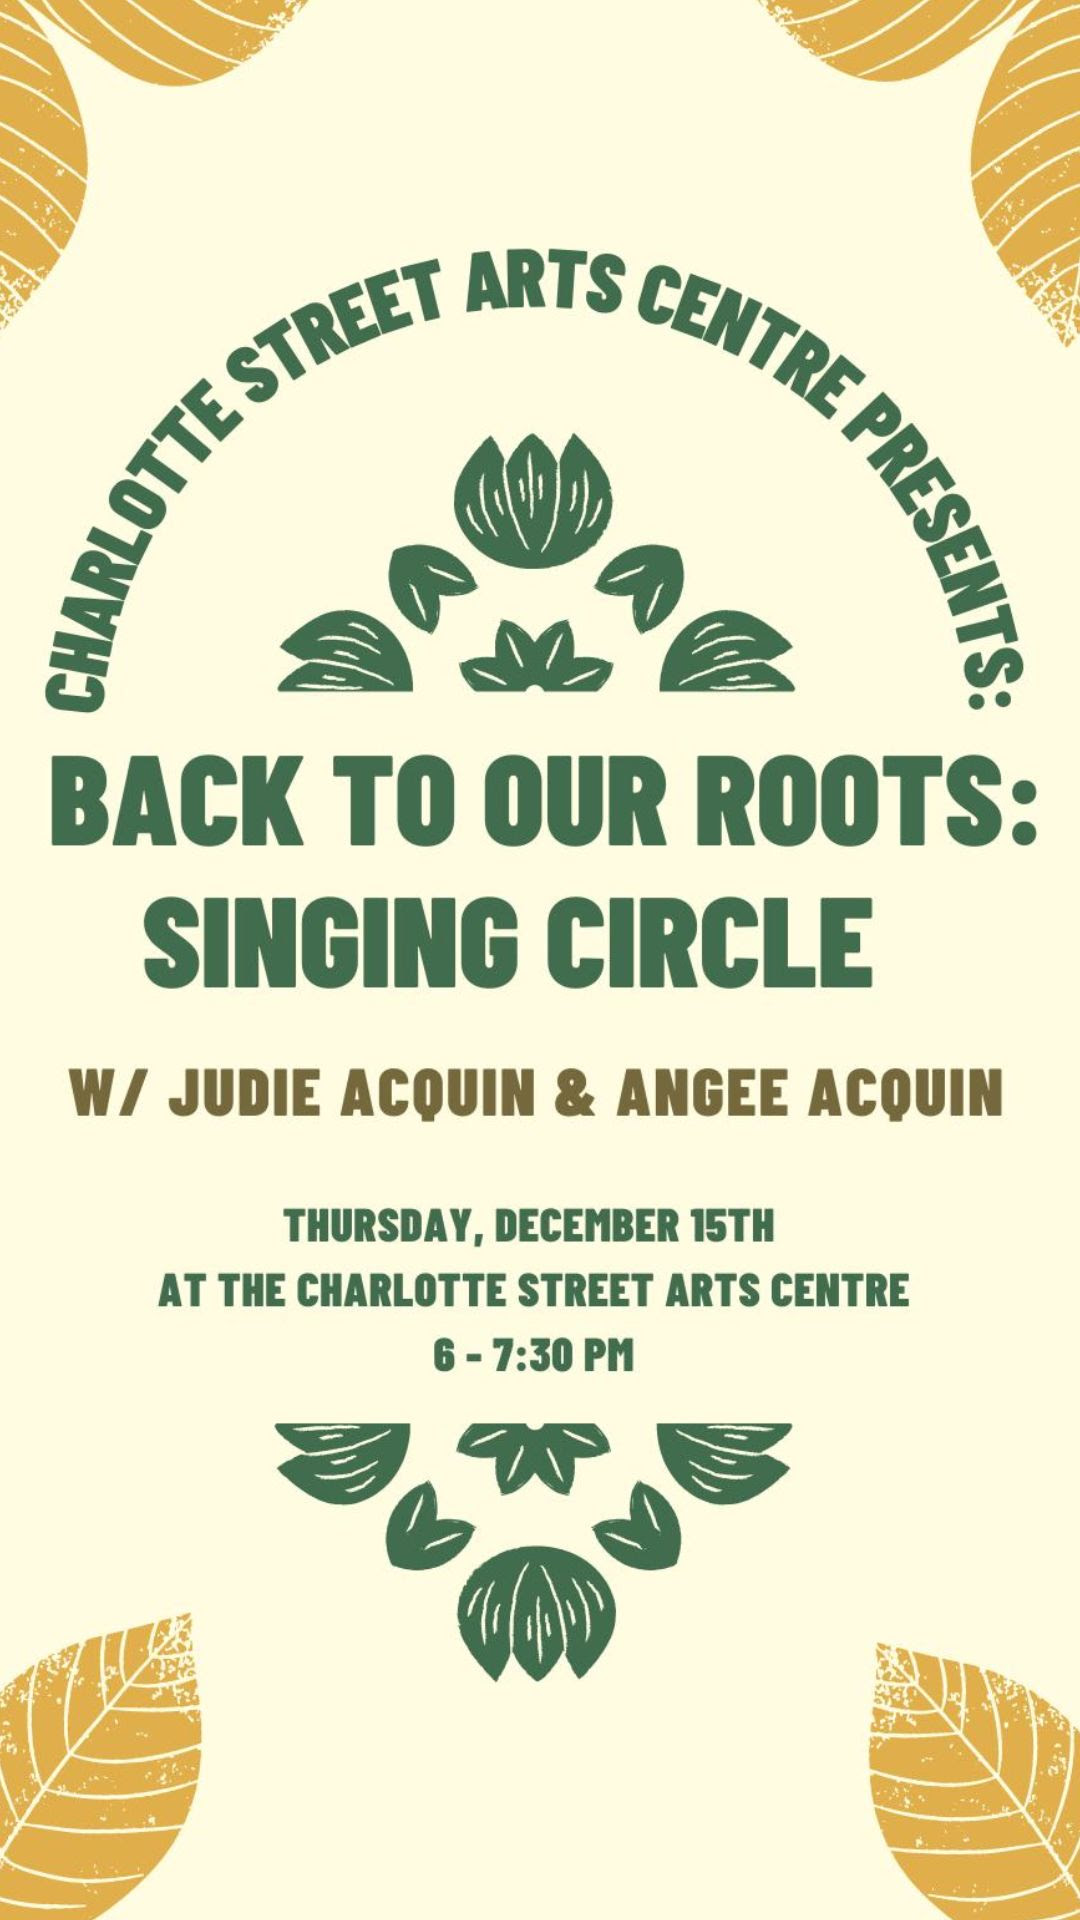 Text reads: Charlotte Street Arts Centre presents: Back to Our Roots: Singing Circle. With Judie Acquin and Angee Acquin. Thursday, December 15th at the Charlotte Street Arts Centre. 6 - 7:30pm